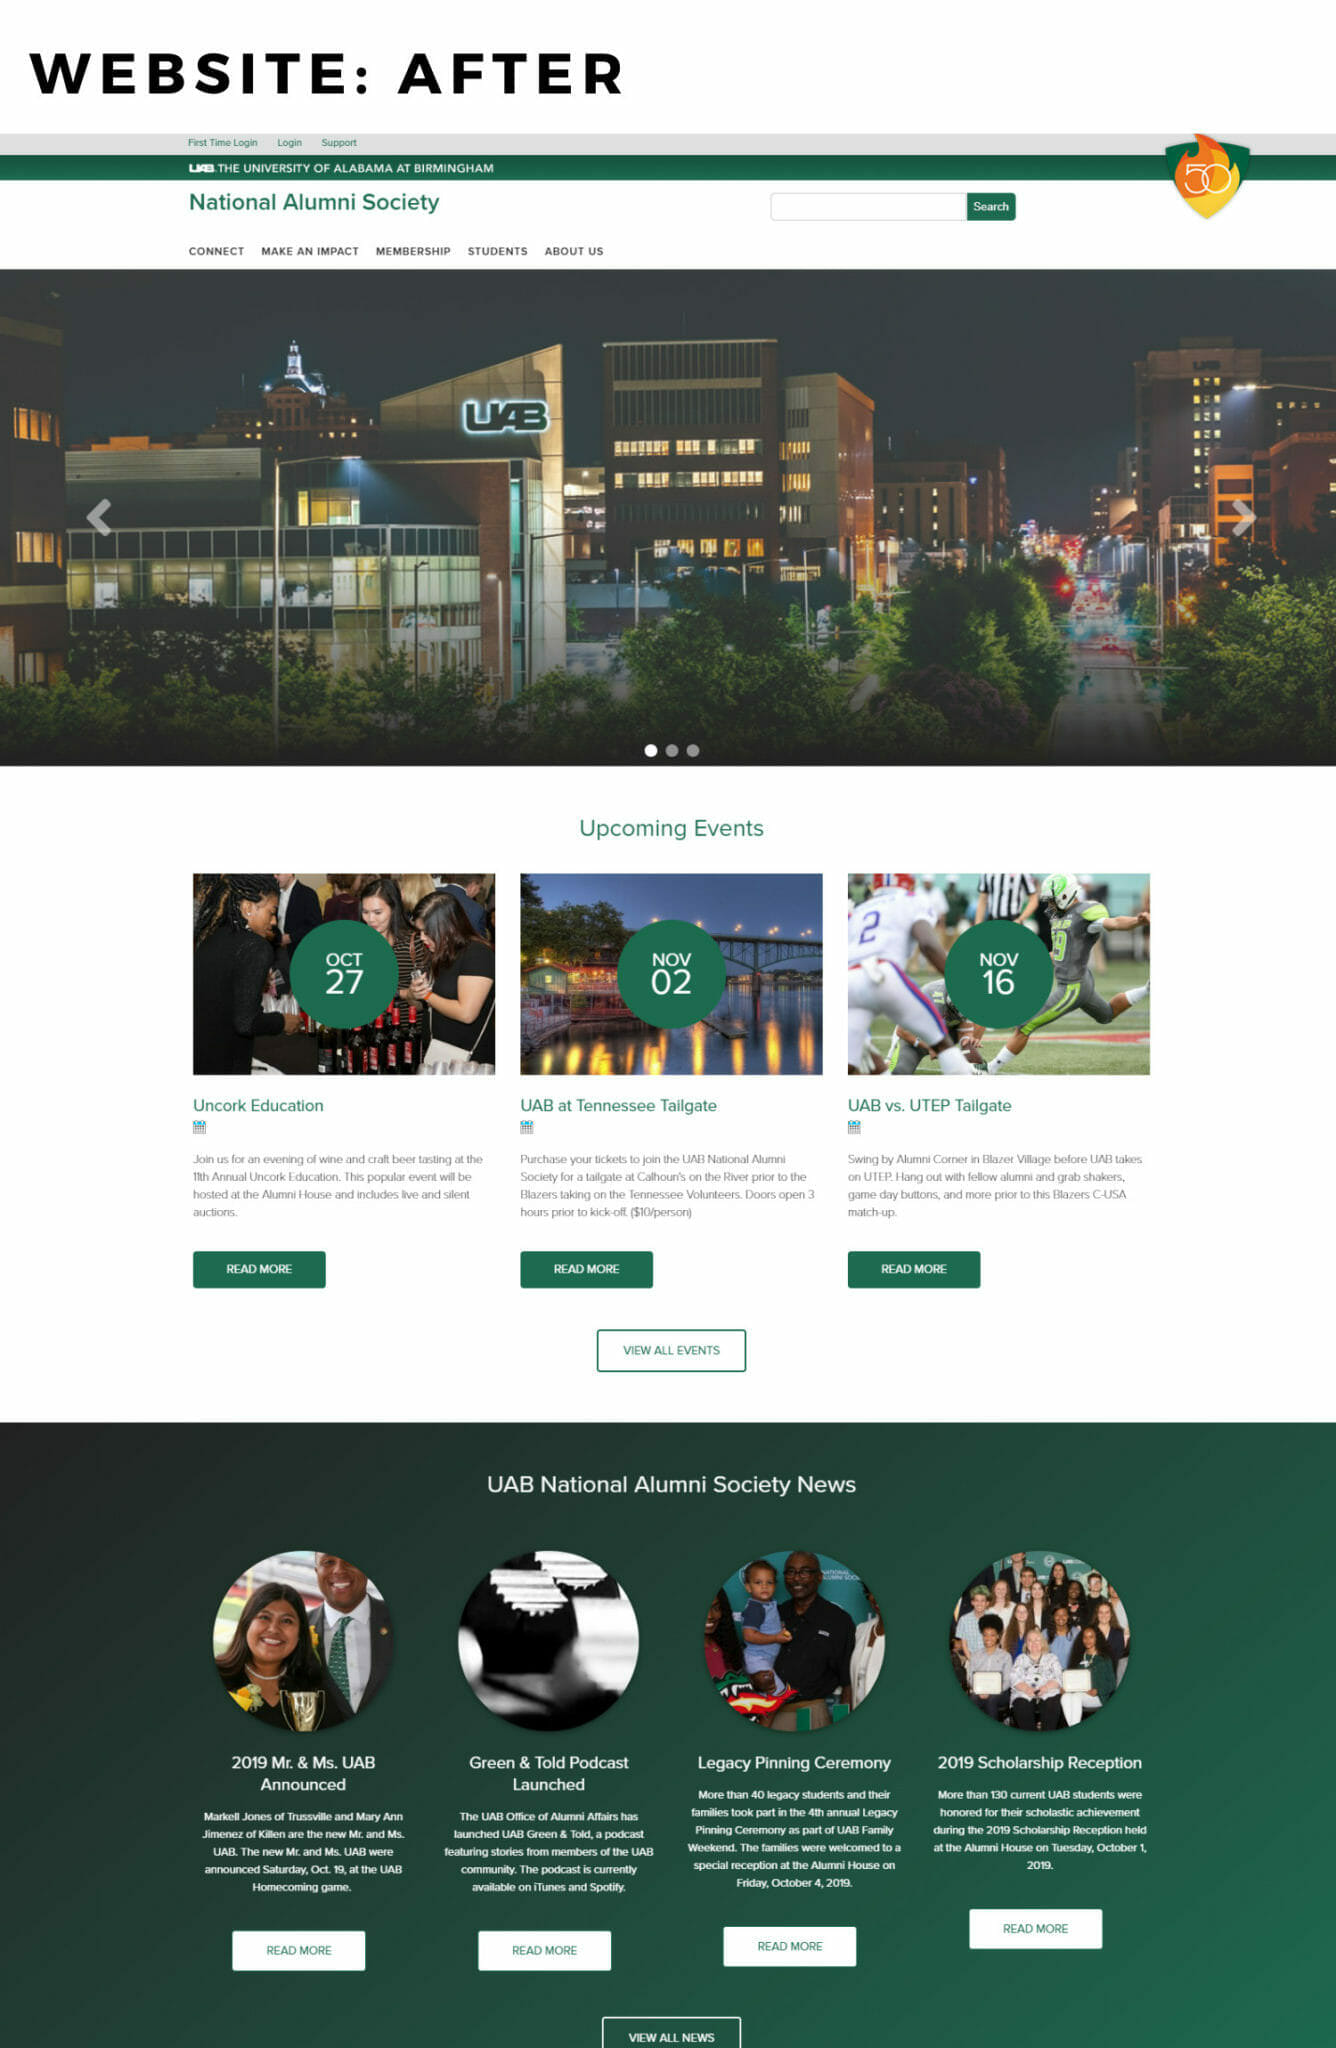 Screenshot of what the UAB Alumni website looked like after implementation